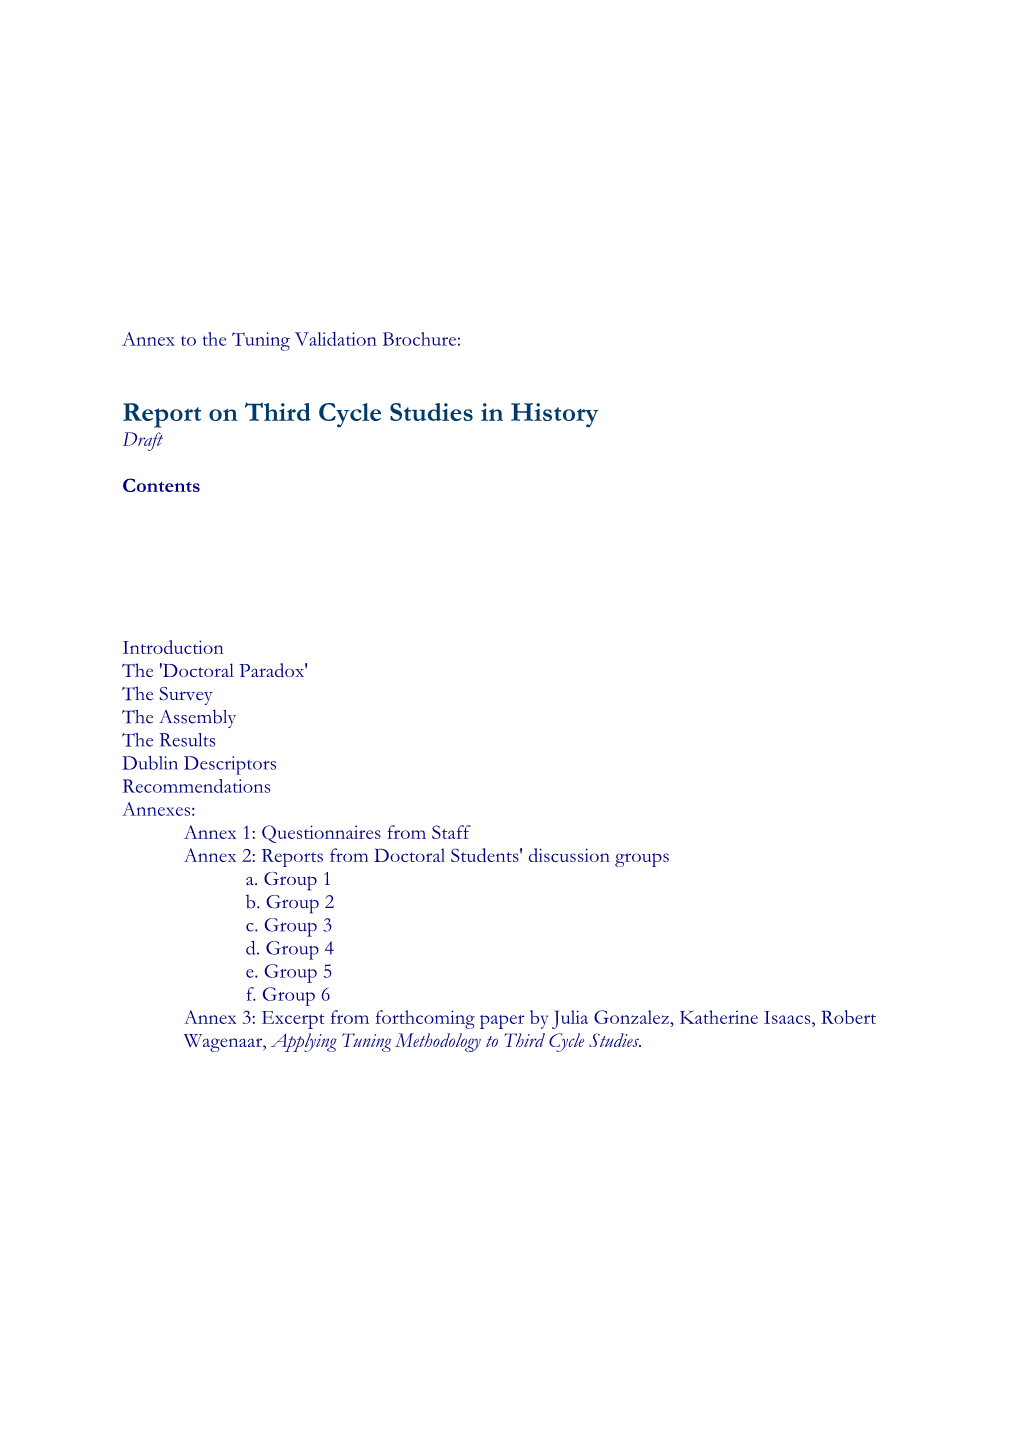 Report on Third Cycle Studies in History Draft